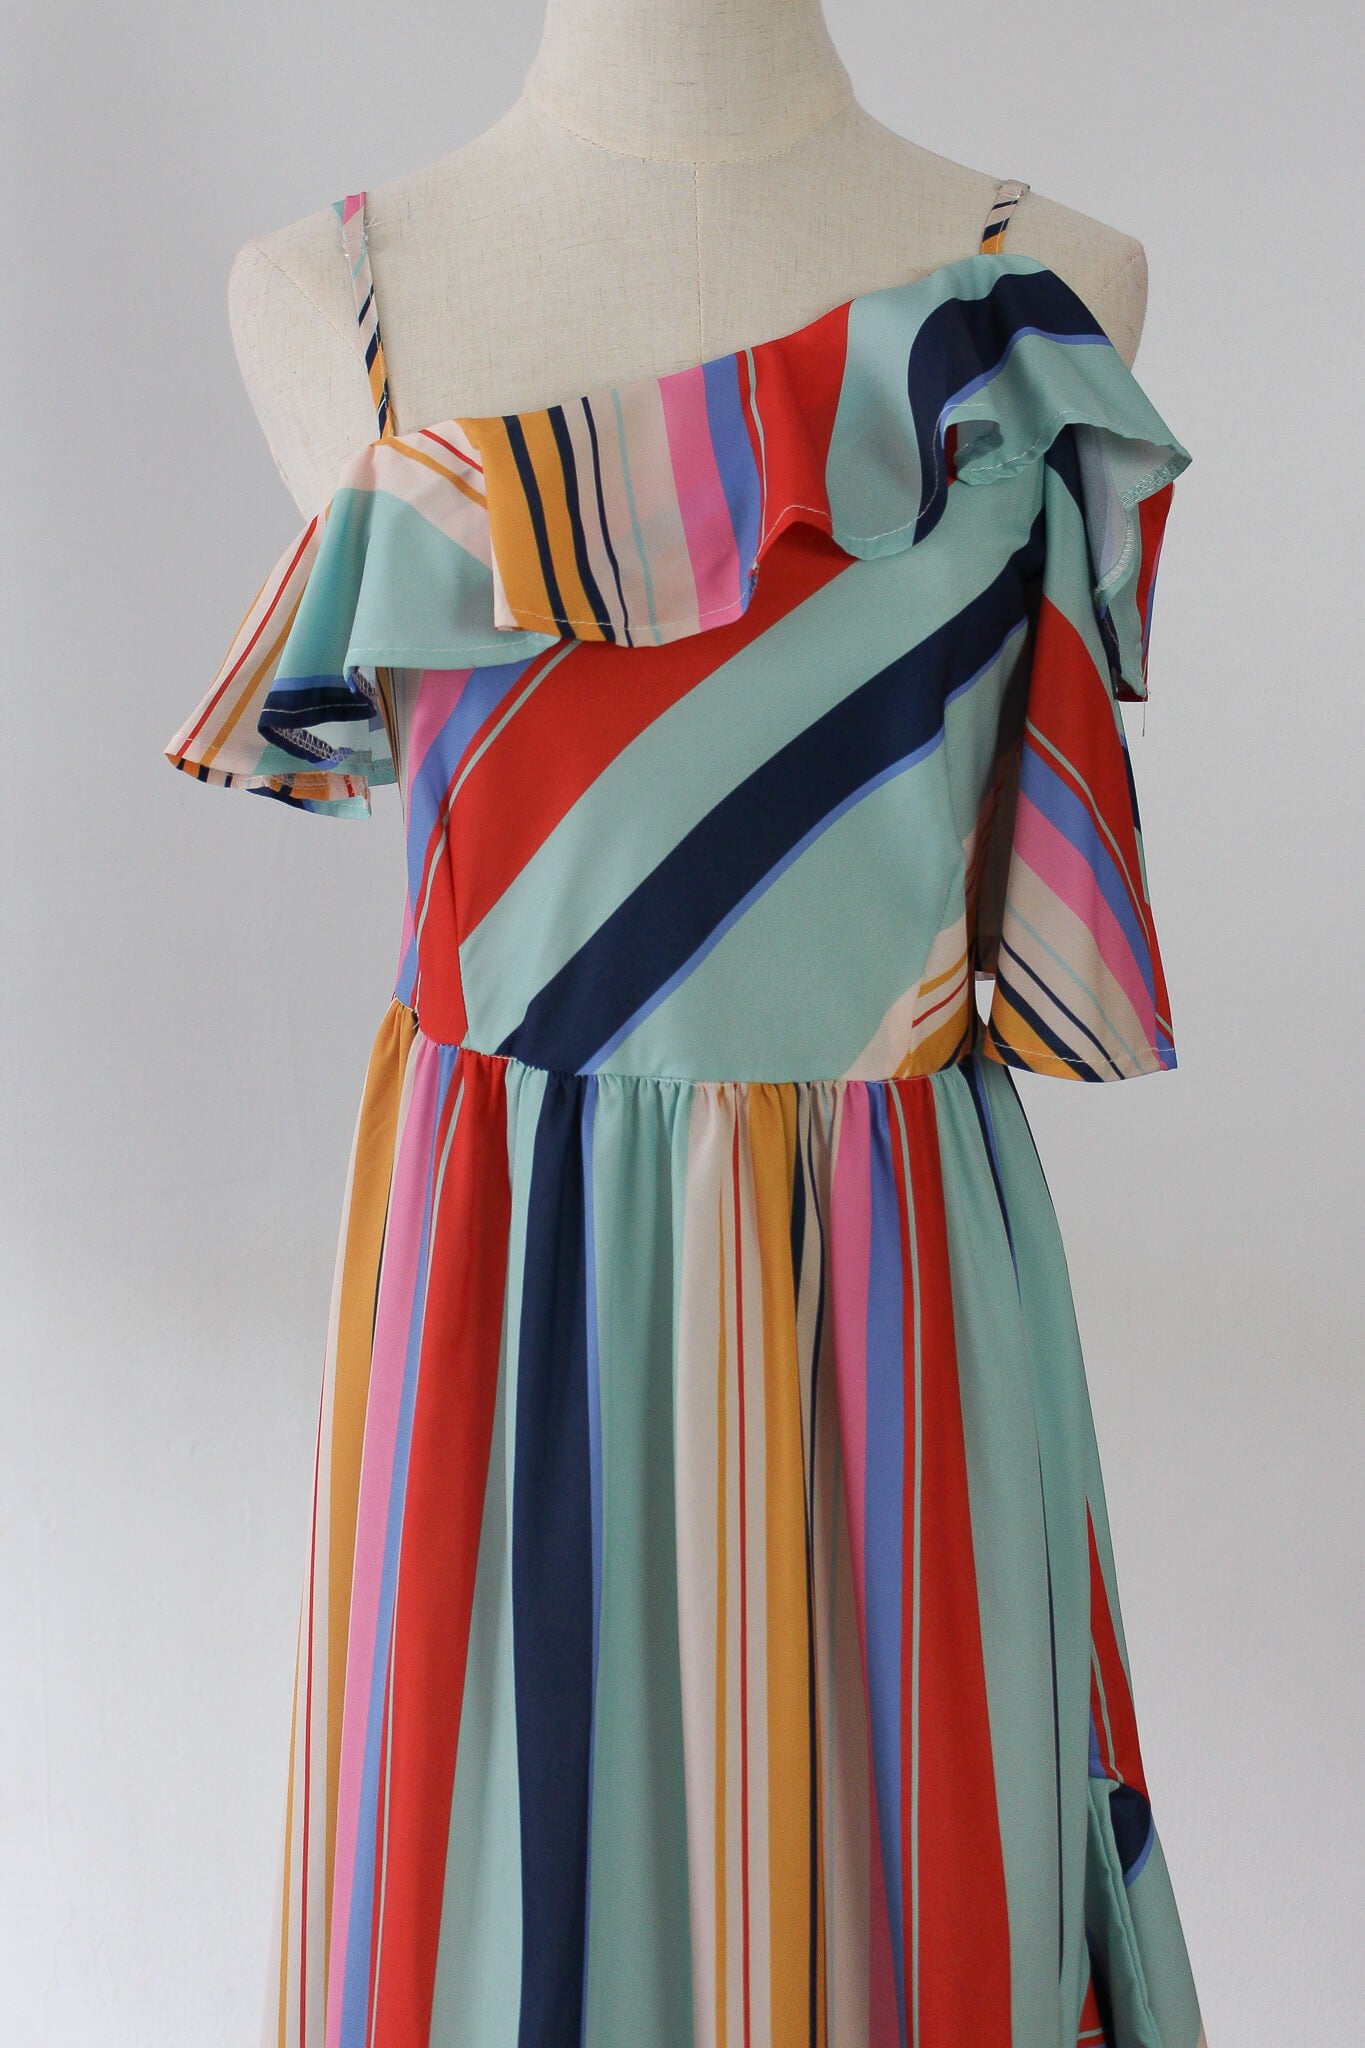 Colourful Striped Ruffled Asymmetrical Dress with adjustable straps, thin and lightweight, perfect for summer